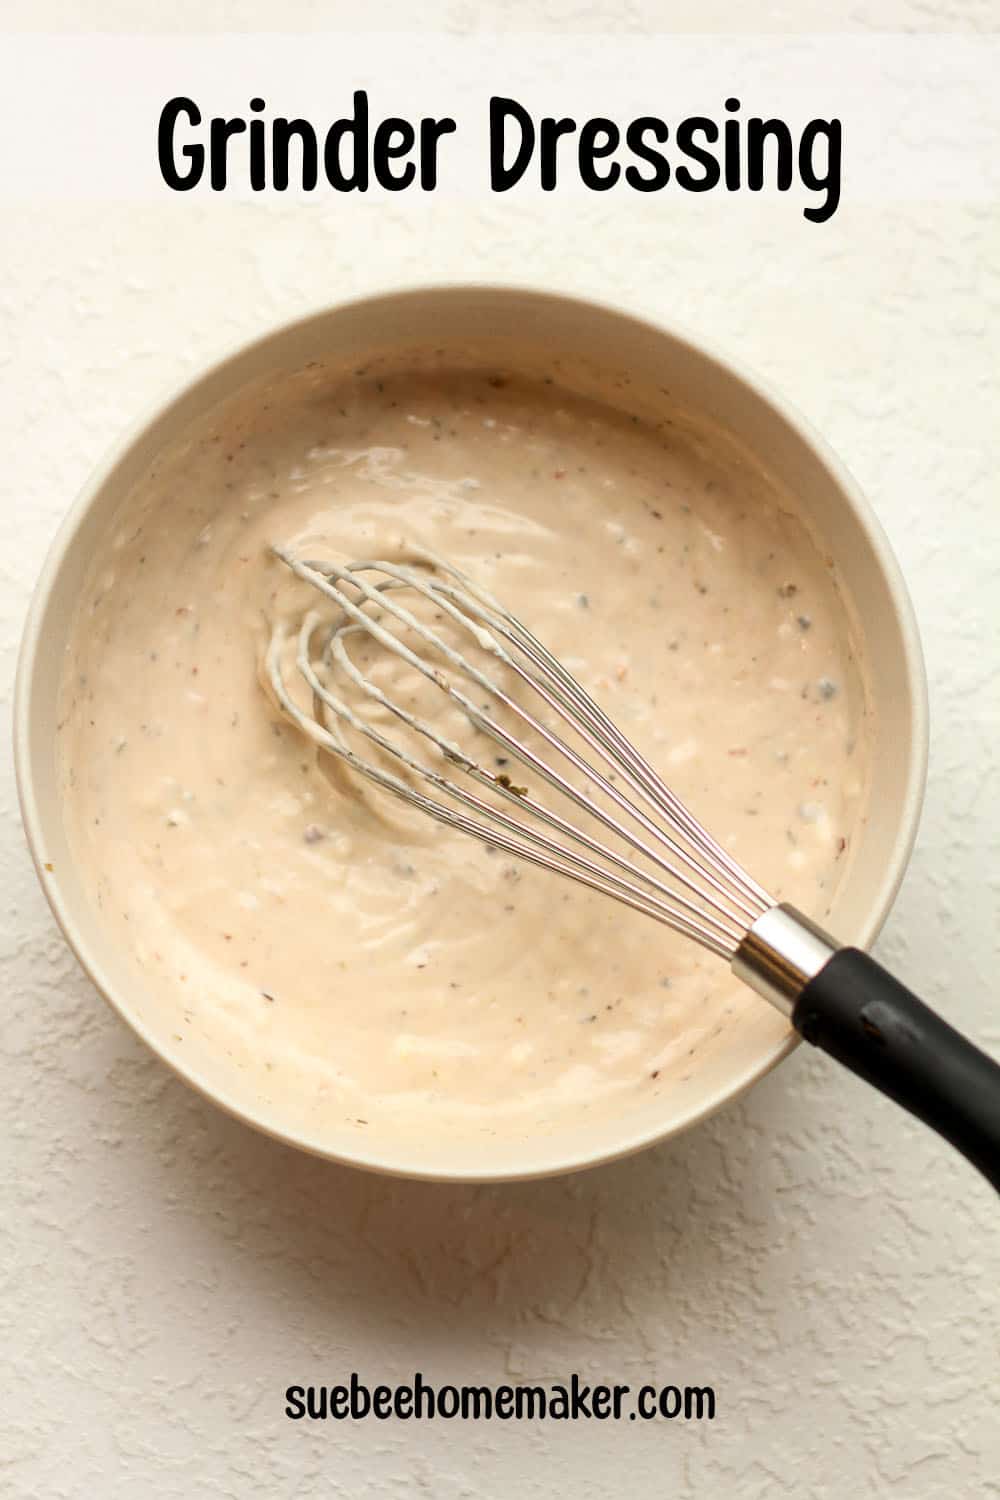 A bowl of the dressing with a whisk inside.